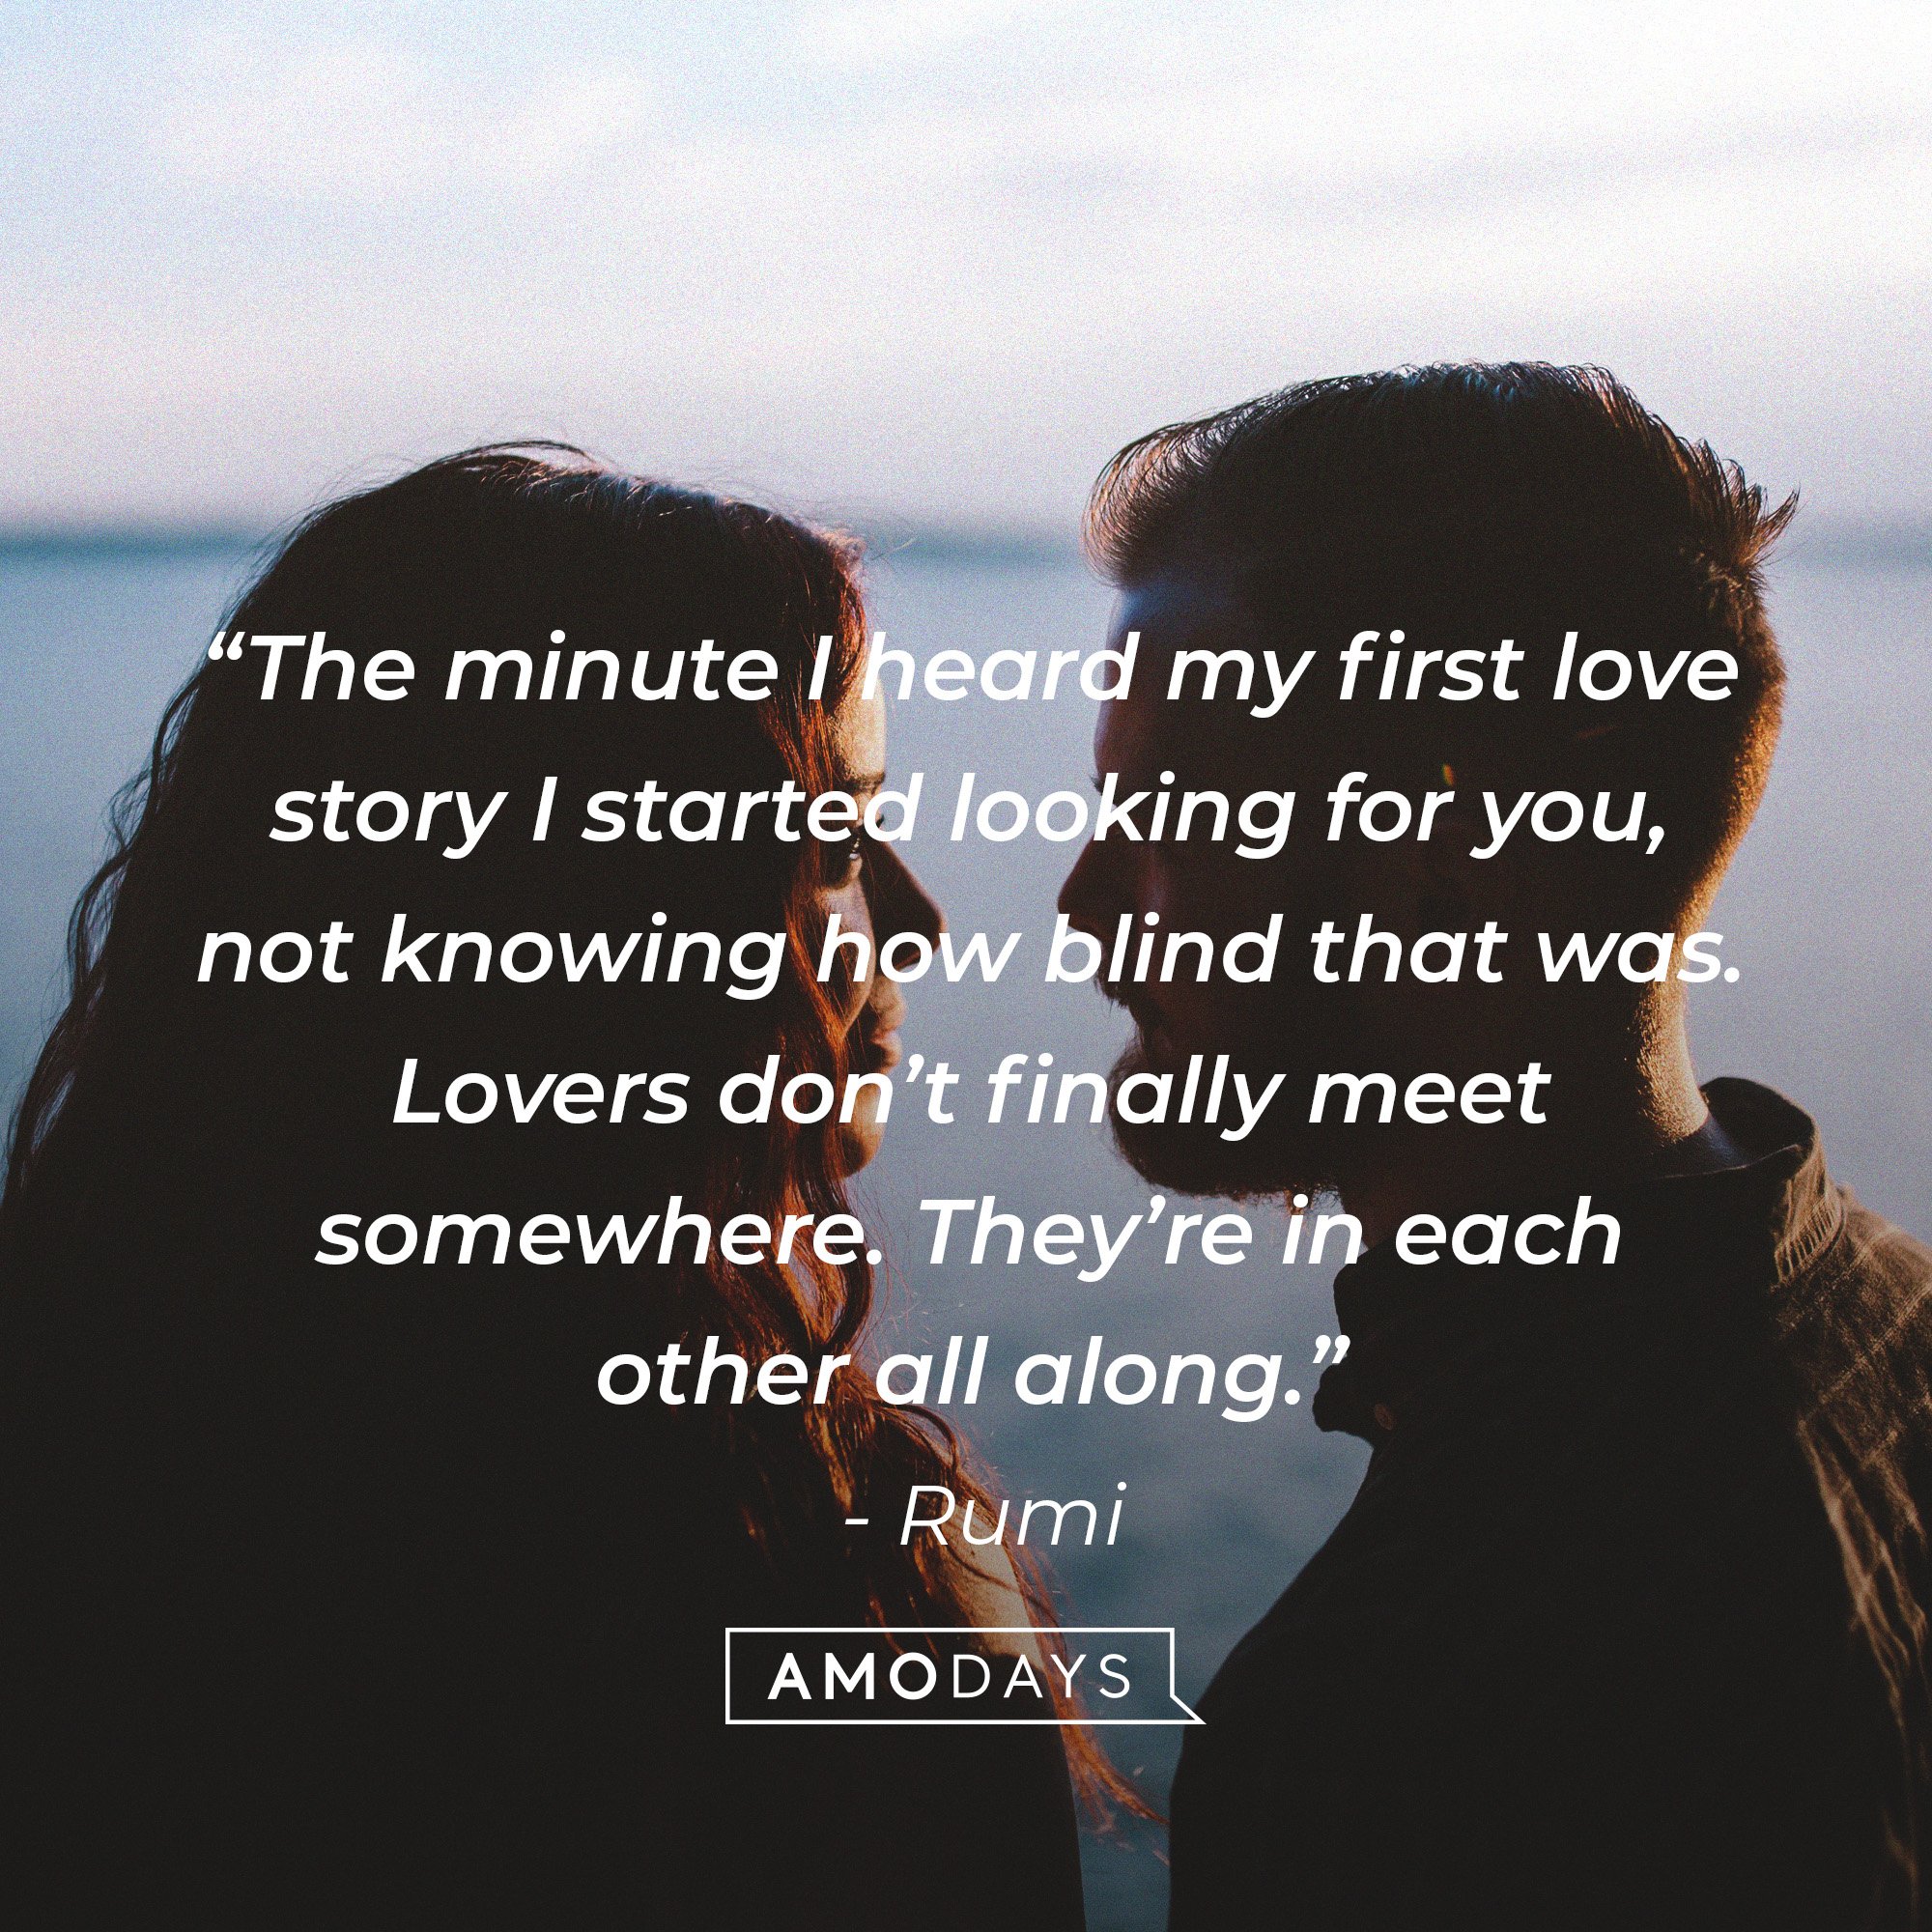 Rumi's quote: “The minute I heard my first love story I started looking for you, not knowing how blind that was. Lovers don’t finally meet somewhere. They’re in each other all along.” | Image: AmoDays